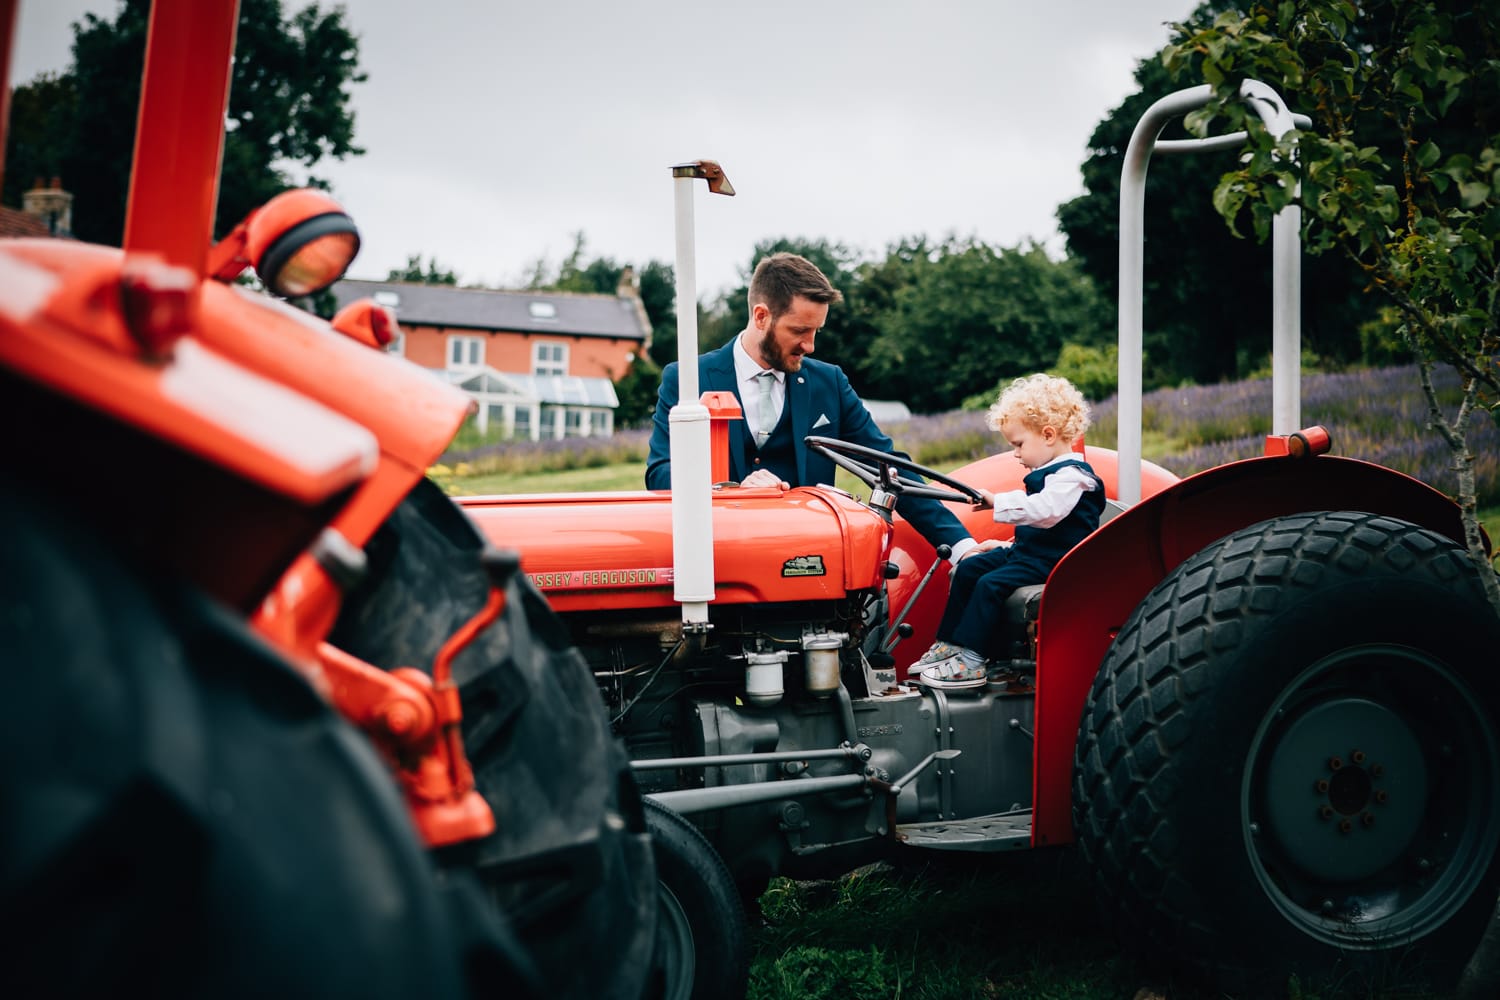 Best Man & Grooms Son on Tractor